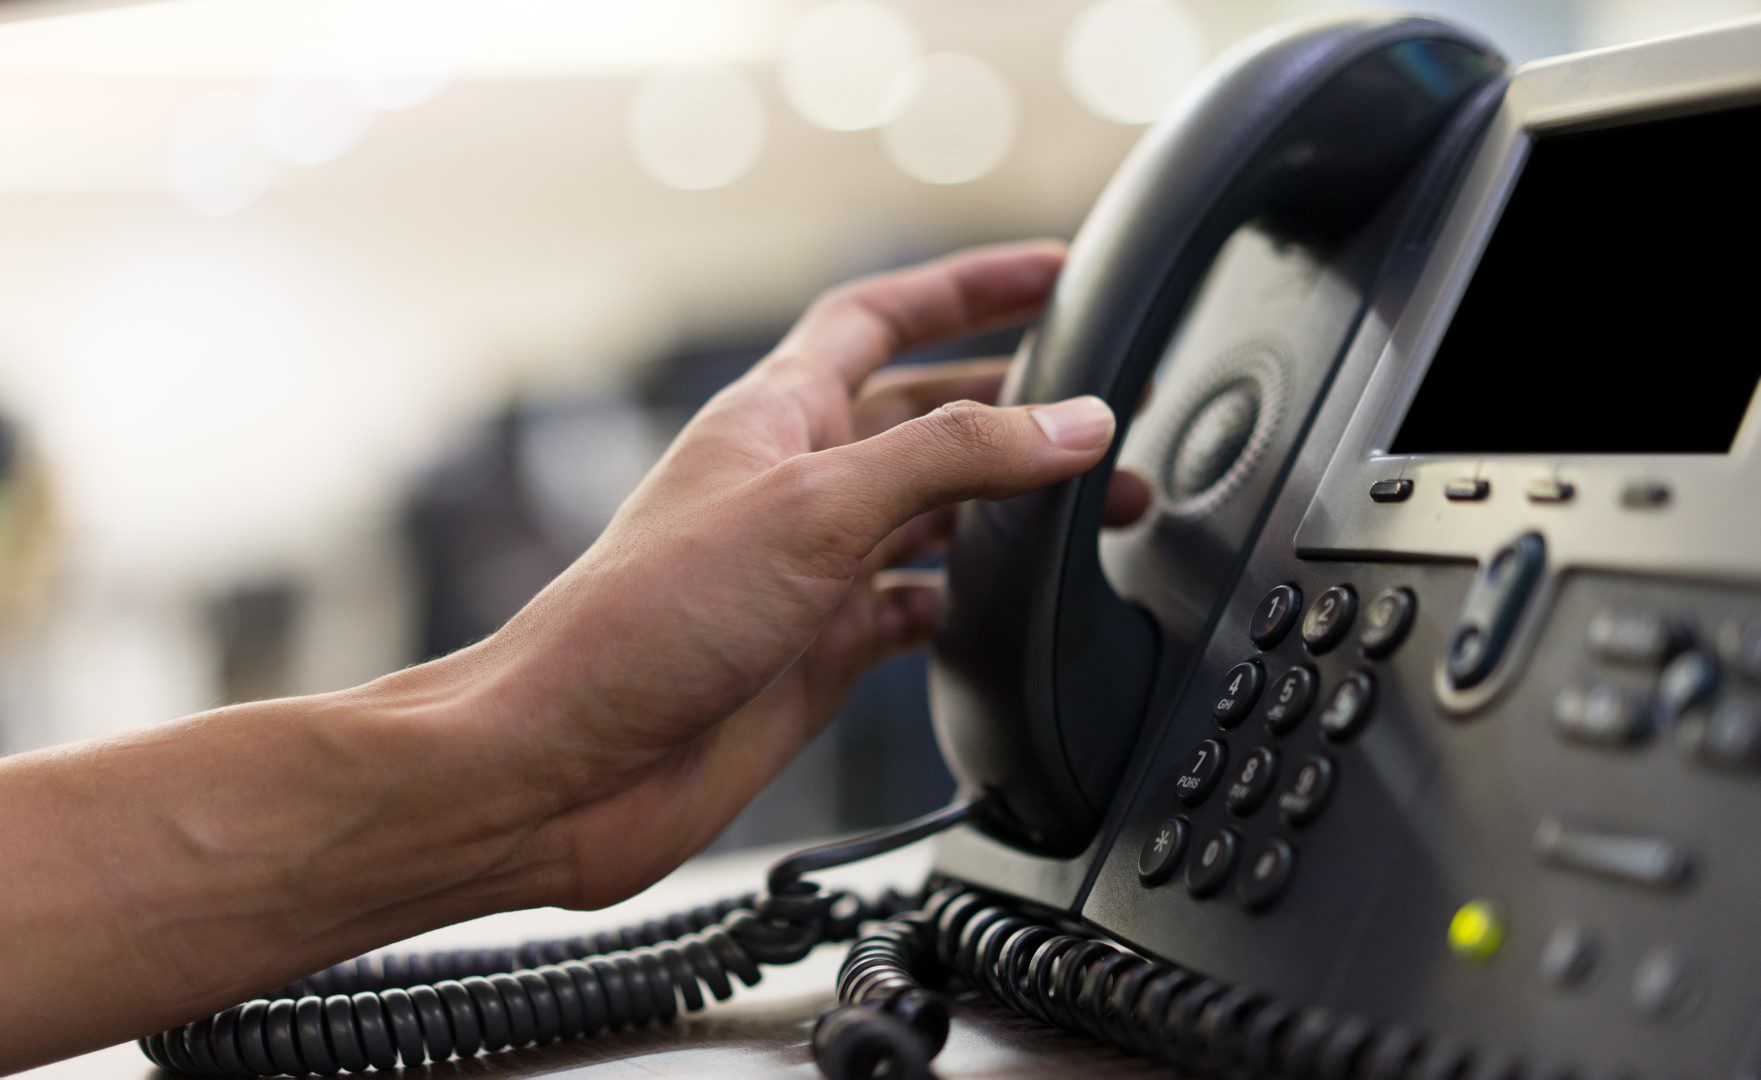 Legacy Phone Systems Support for Showrooms